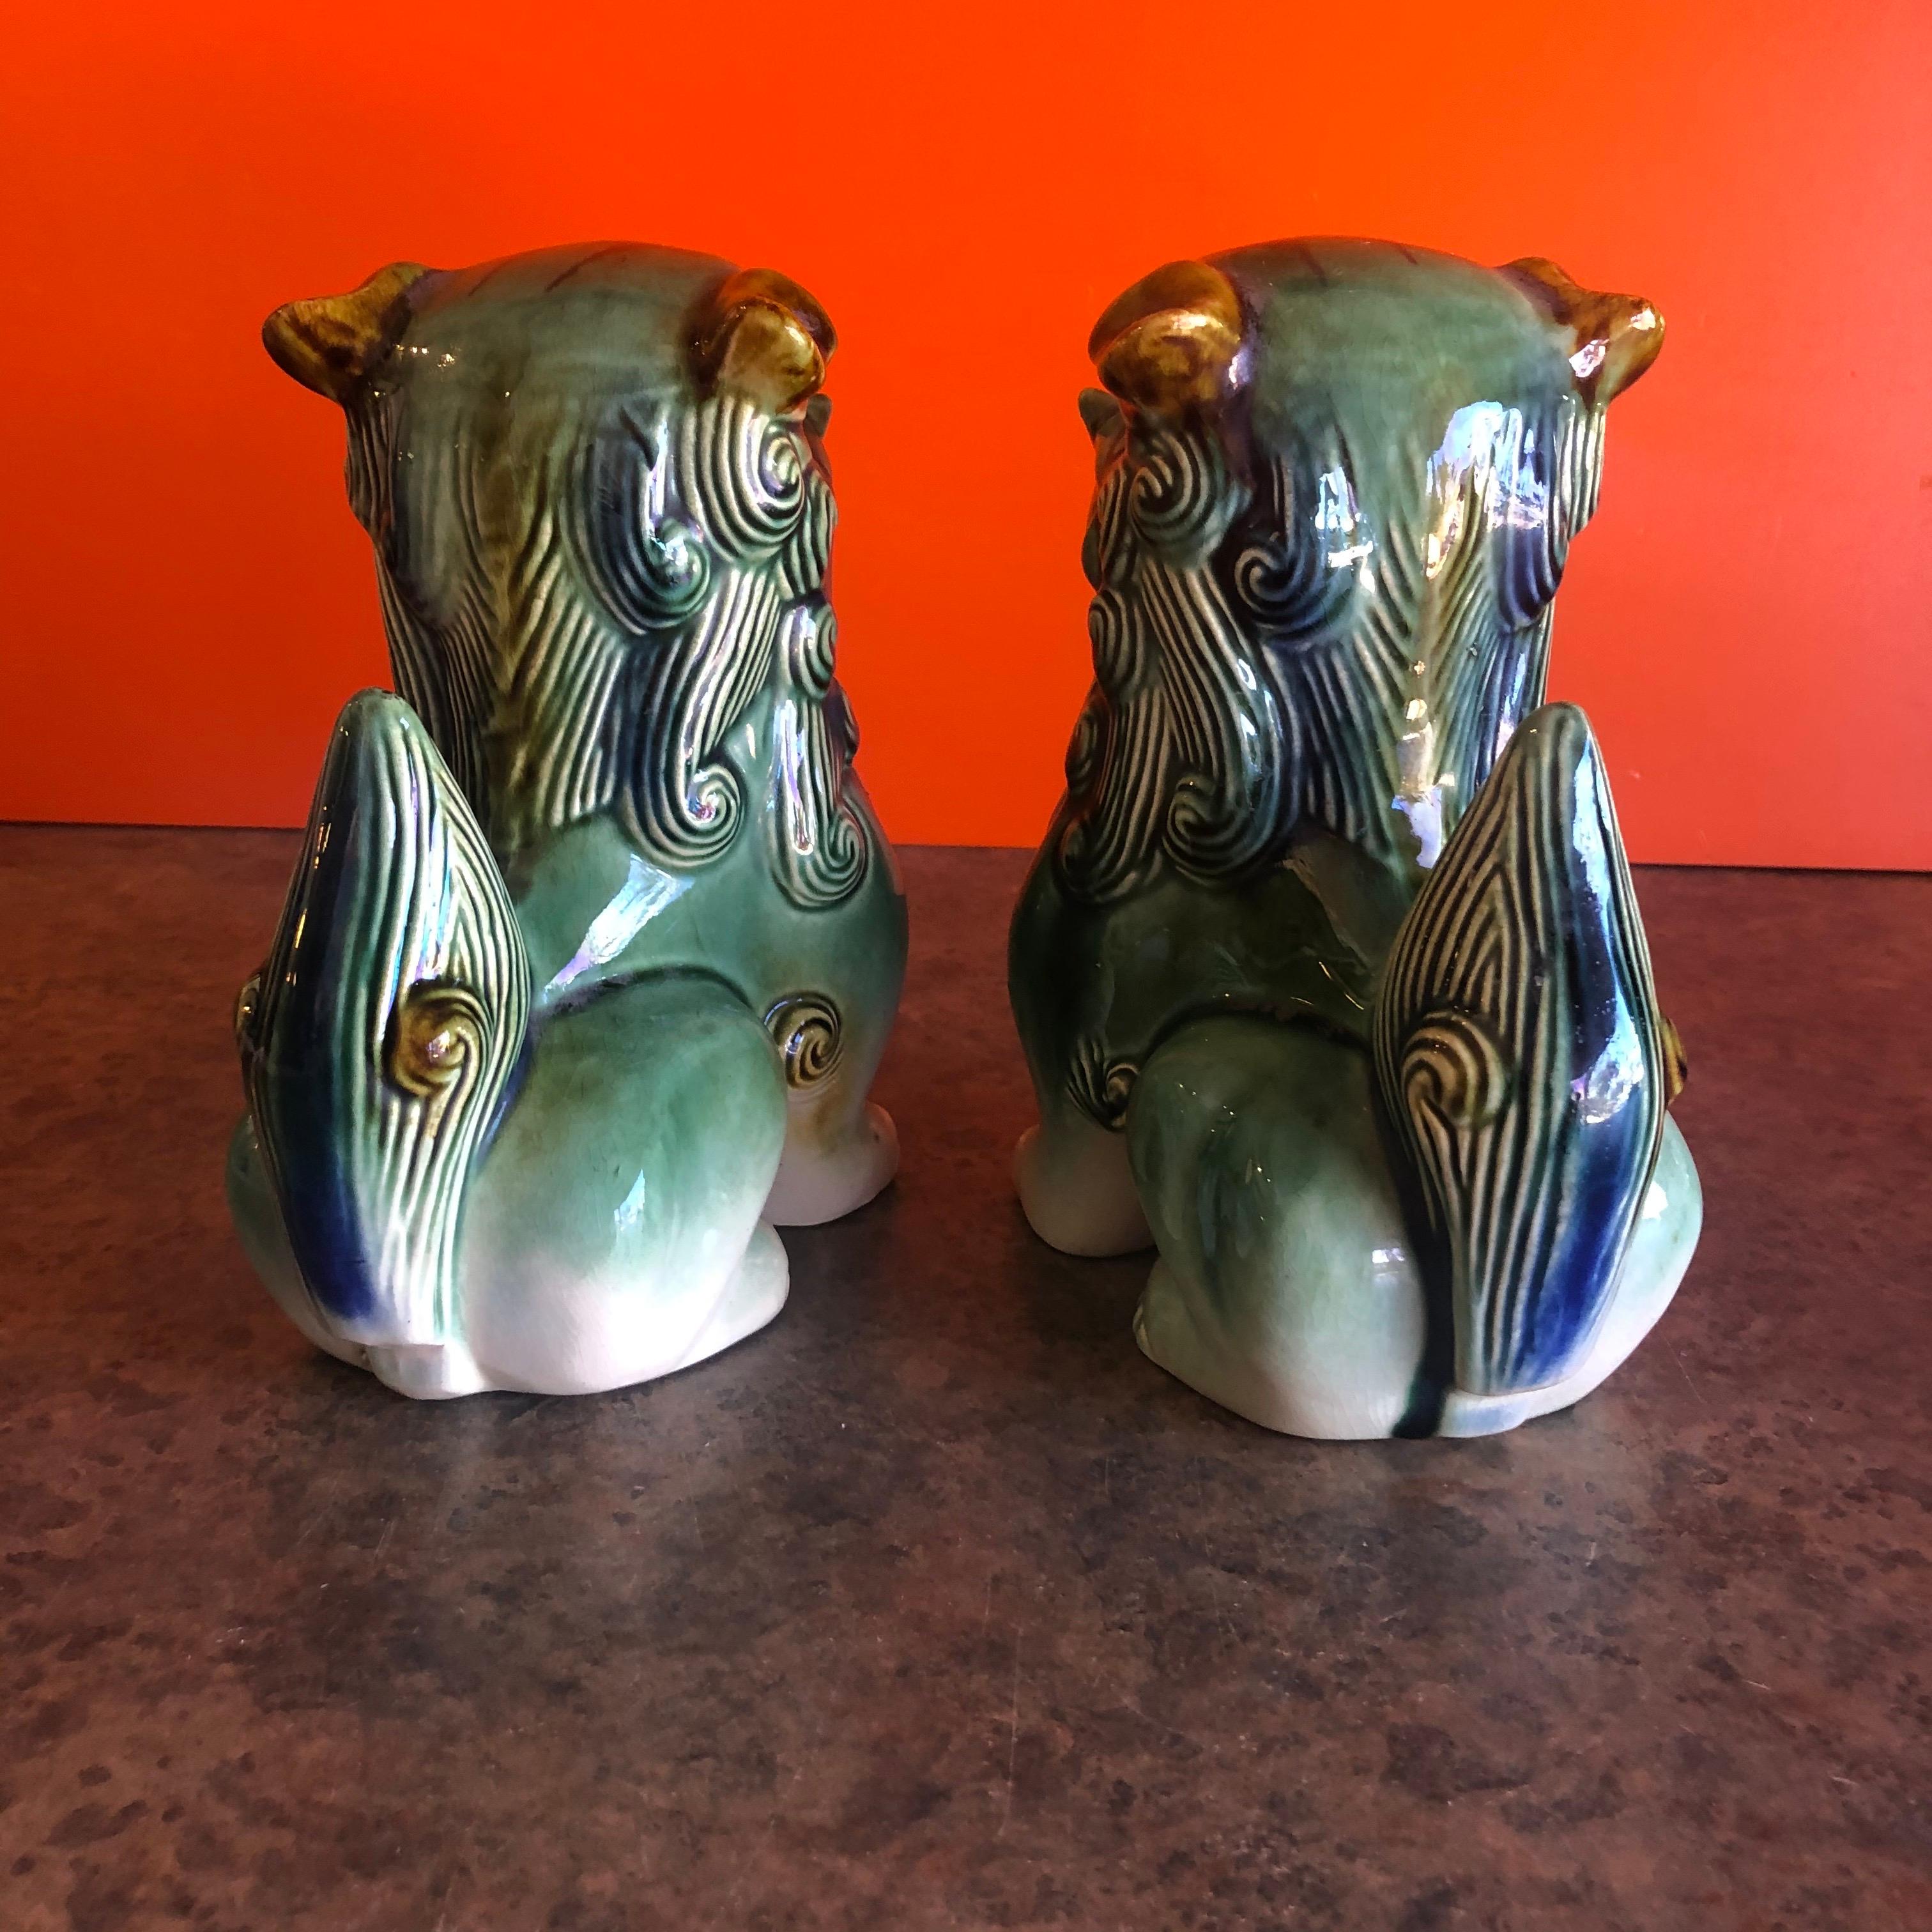 Glazed Pair of Midcentury Ceramic Foo Dogs / Bookends